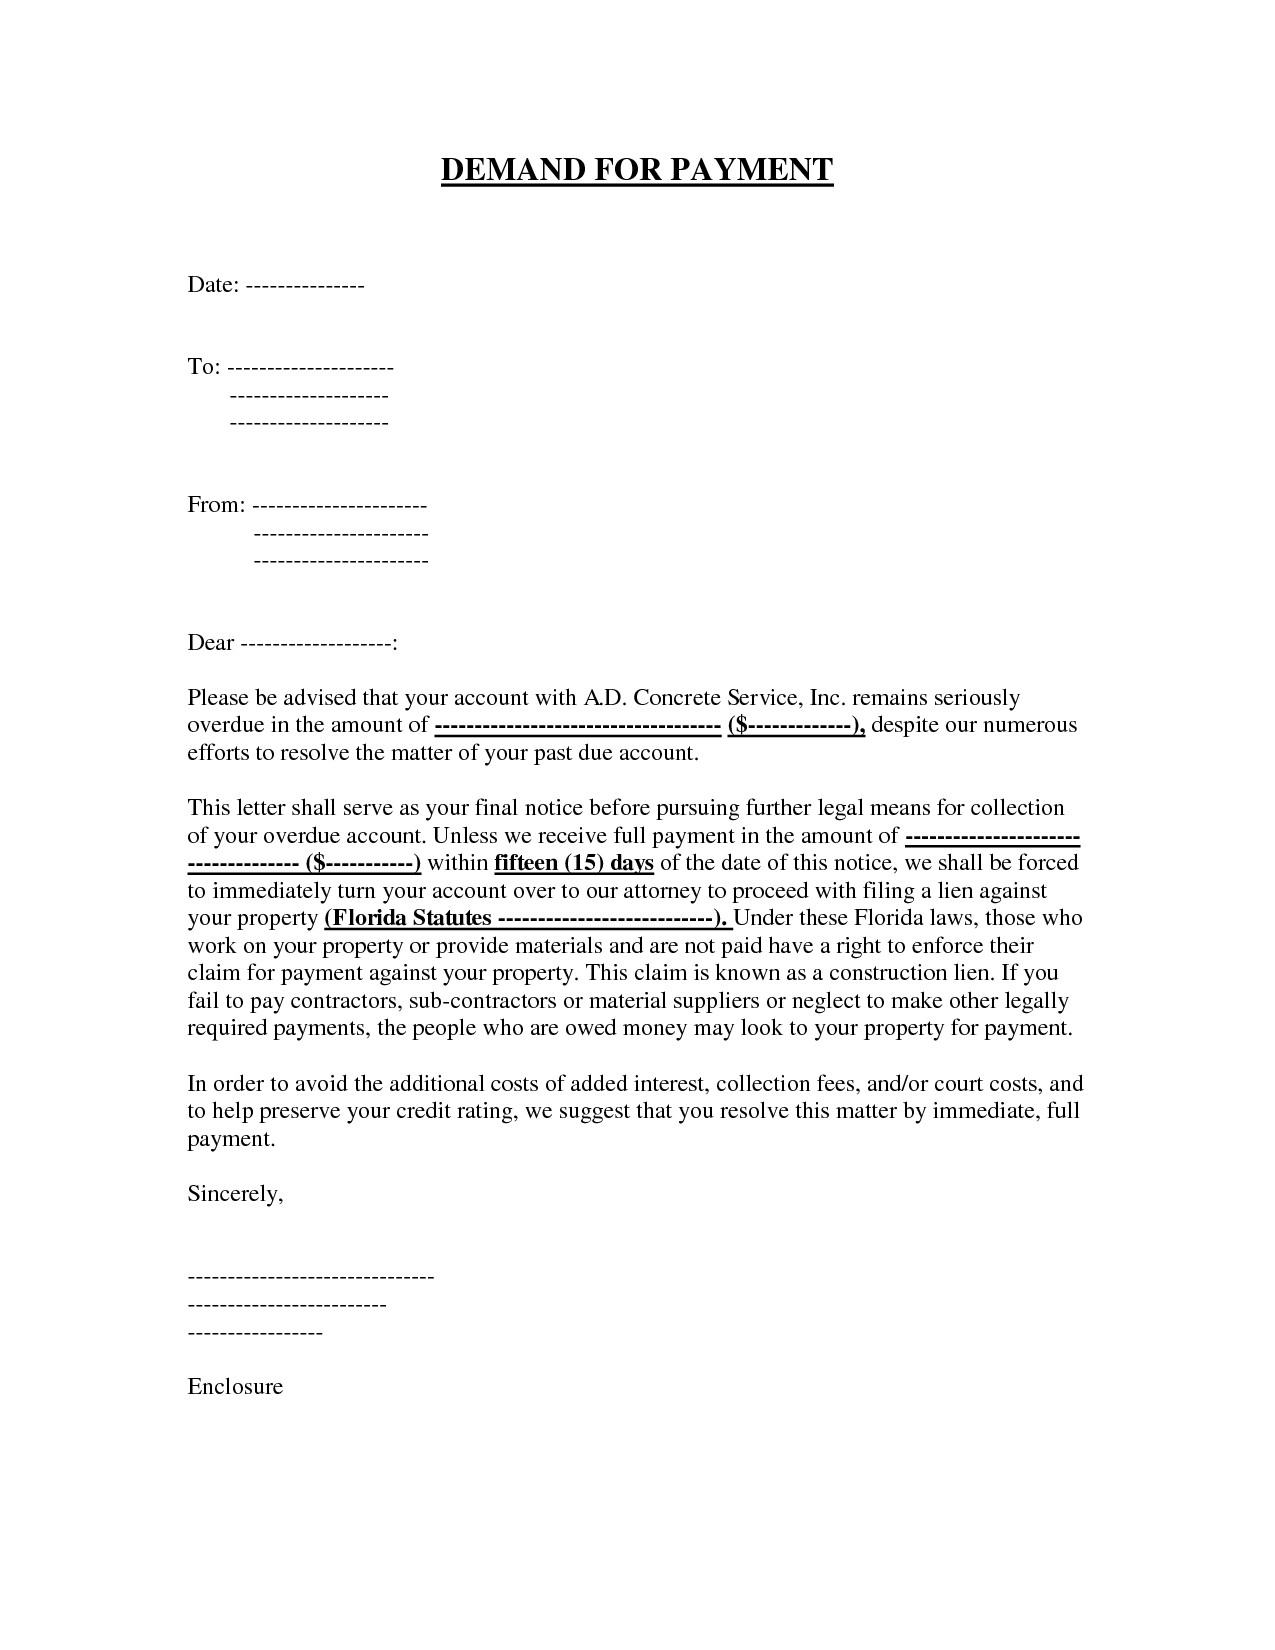 Demand Letter Template for Money Owed - Free Cover Letter Templates Demand Letter for Payment